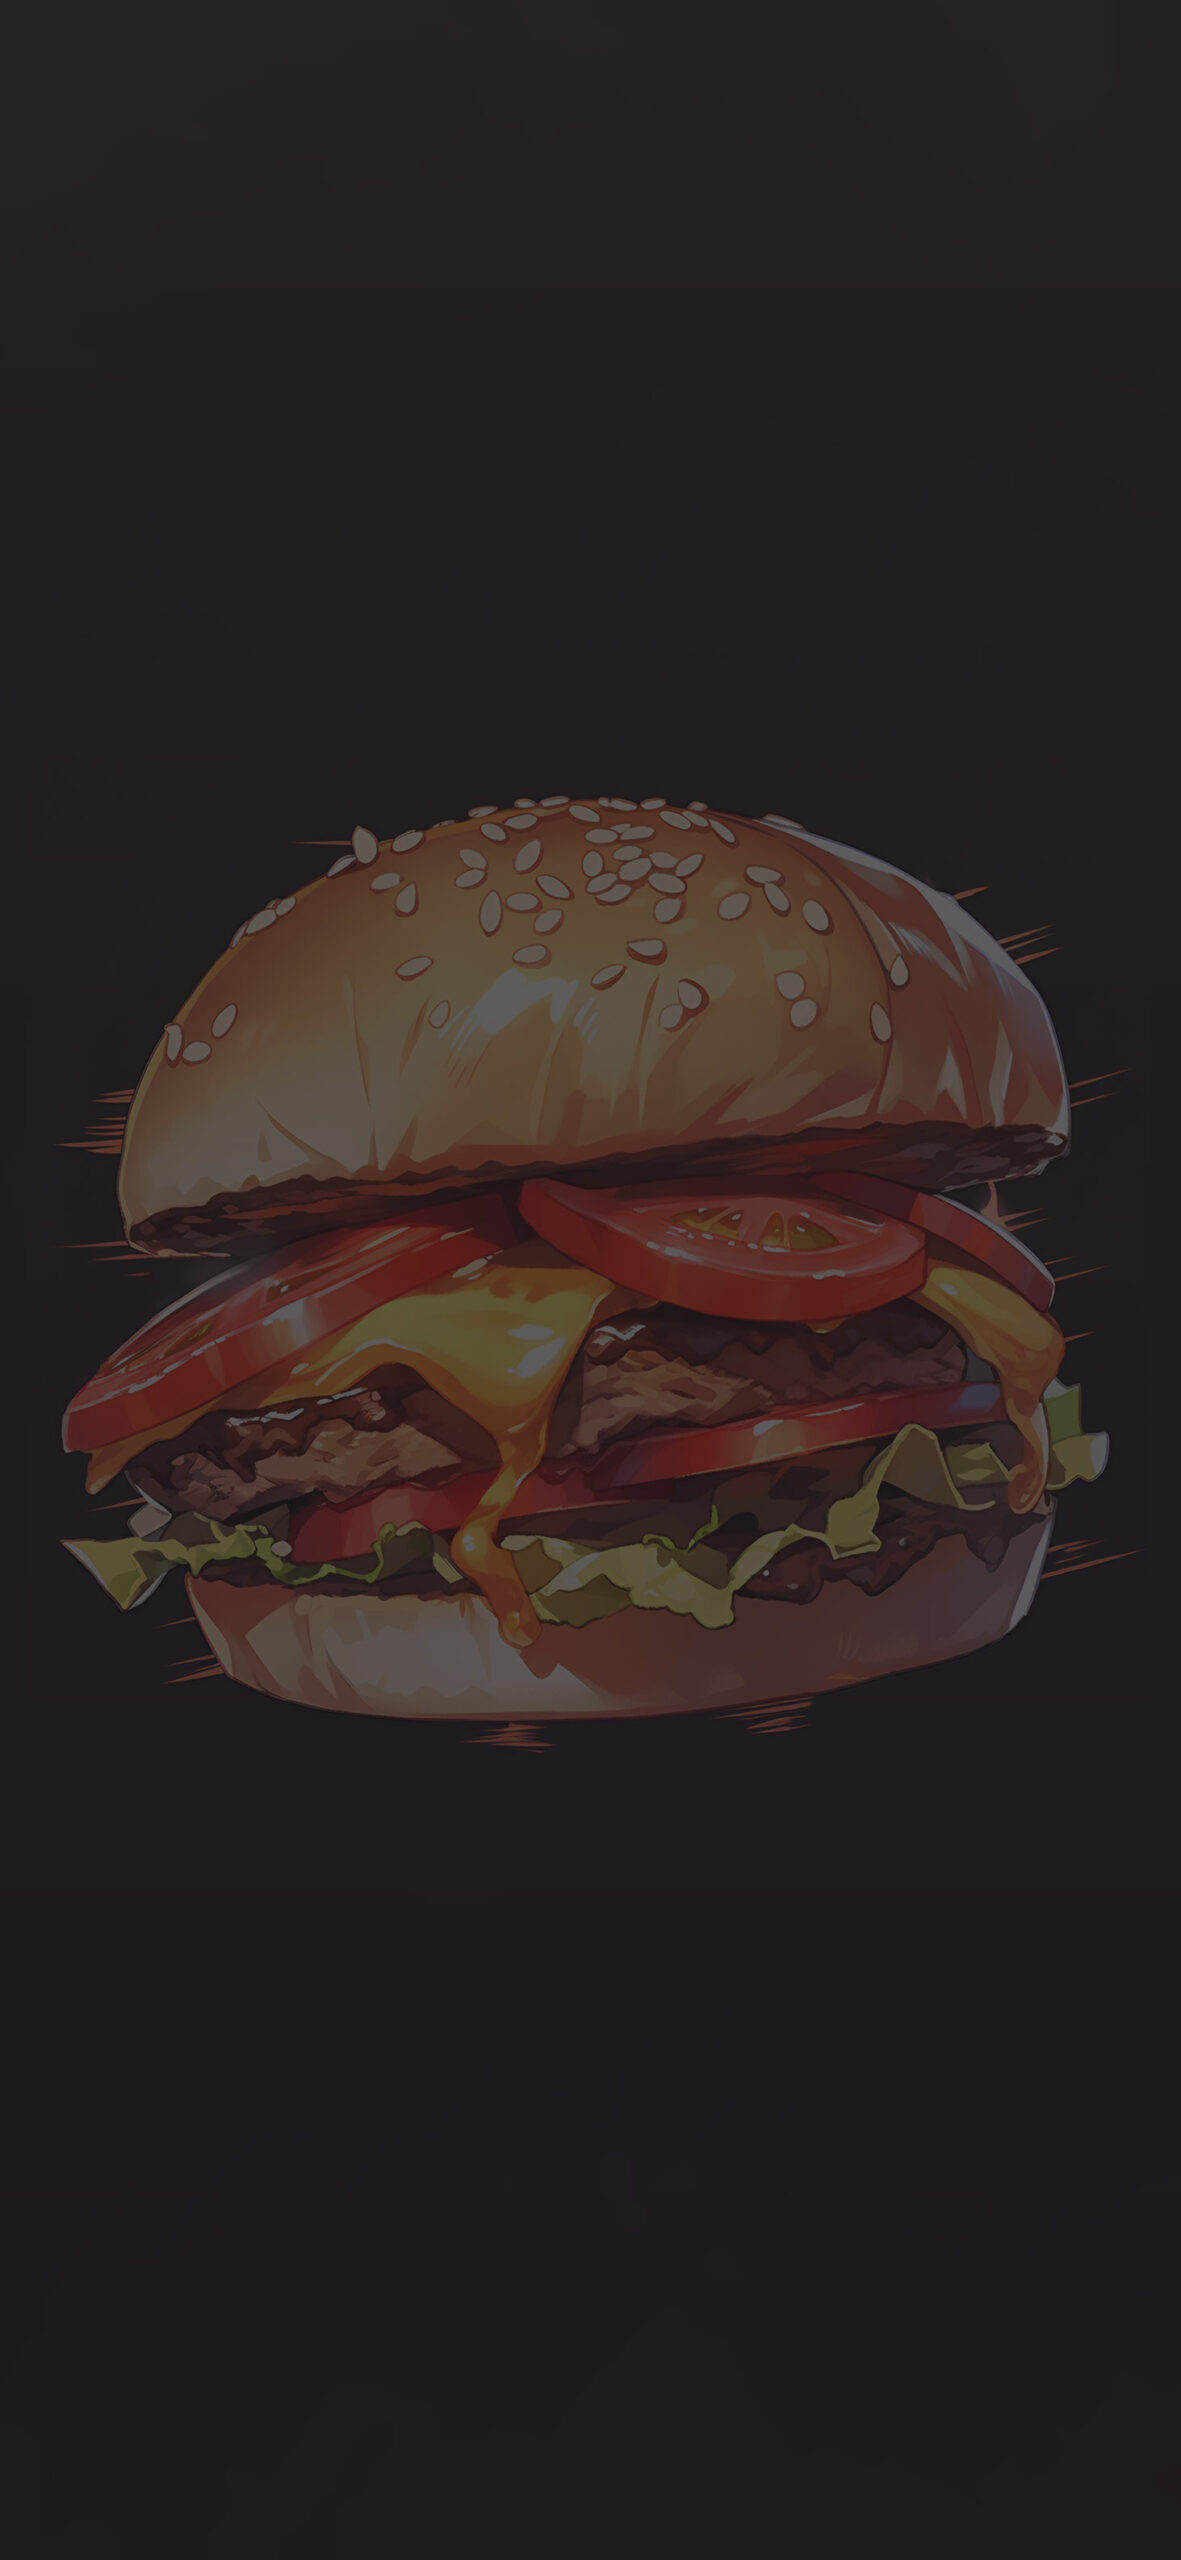 Delicious juicy burger on a black background wallpaper Tasty f